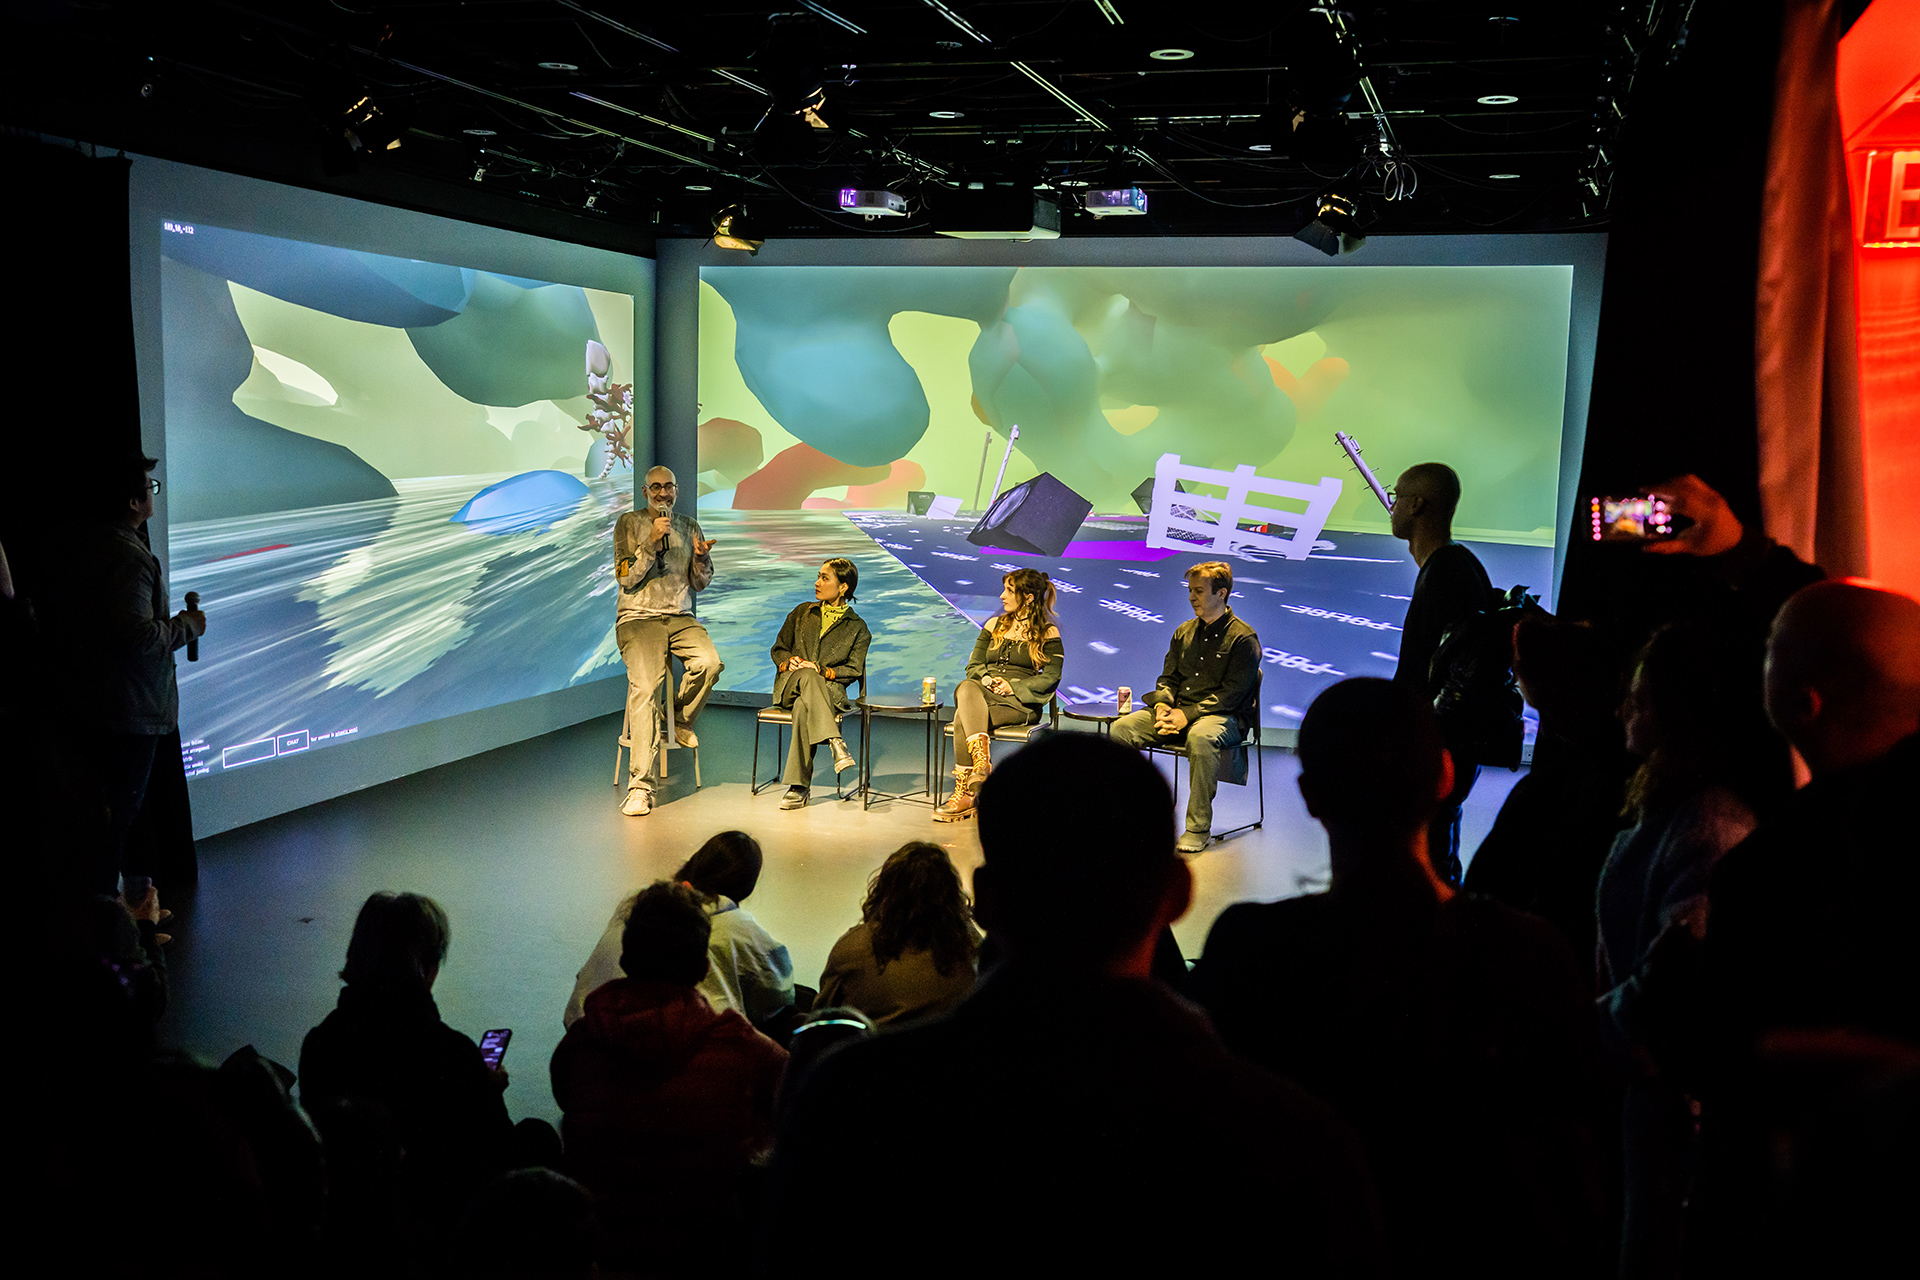 Photograph of four artists seated in a panel discussion style arrangement, with 3d graphics of the exhibition projected behind them.'